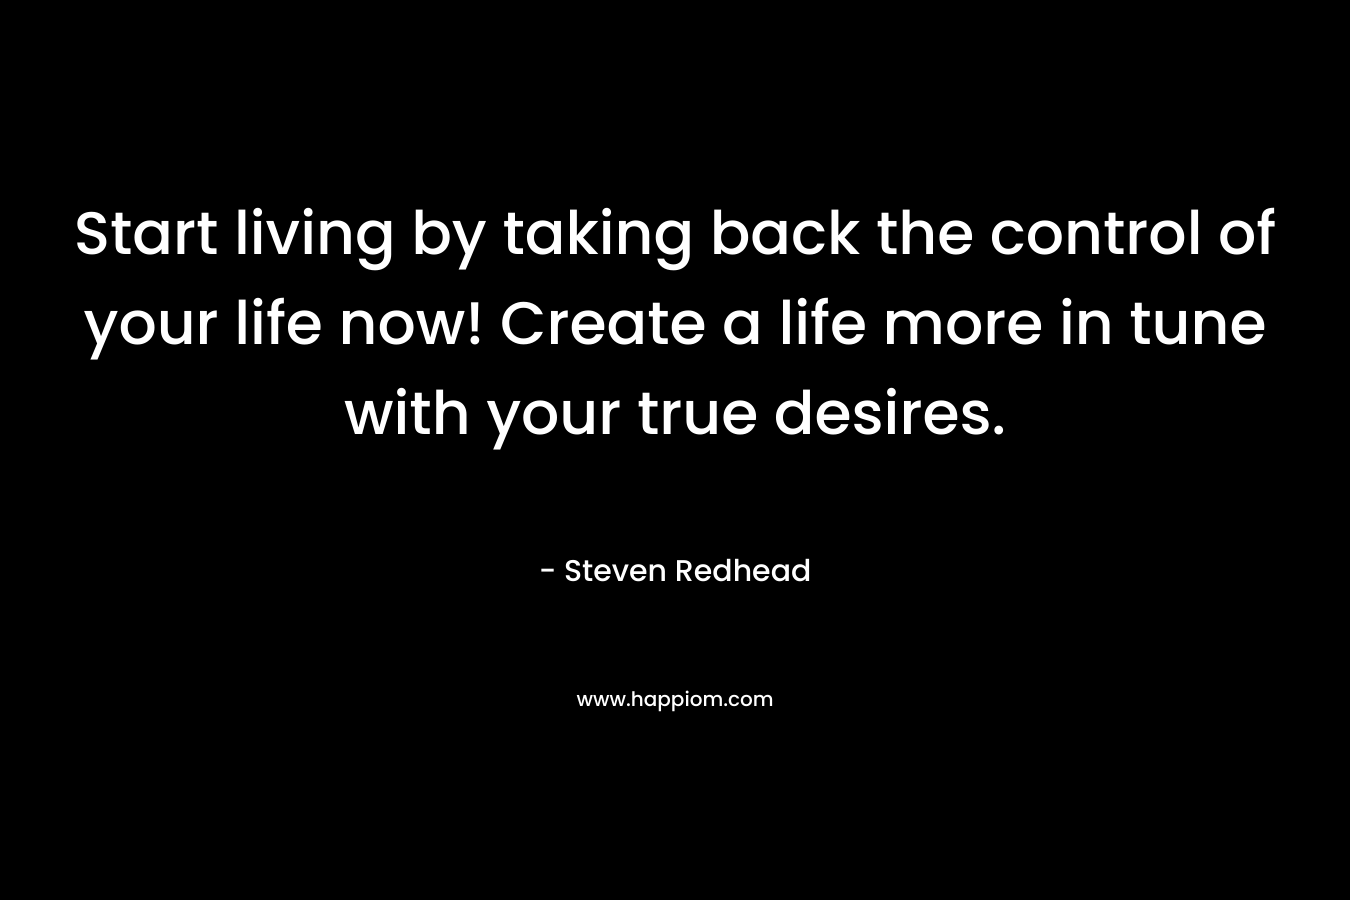 Start living by taking back the control of your life now! Create a life more in tune with your true desires.